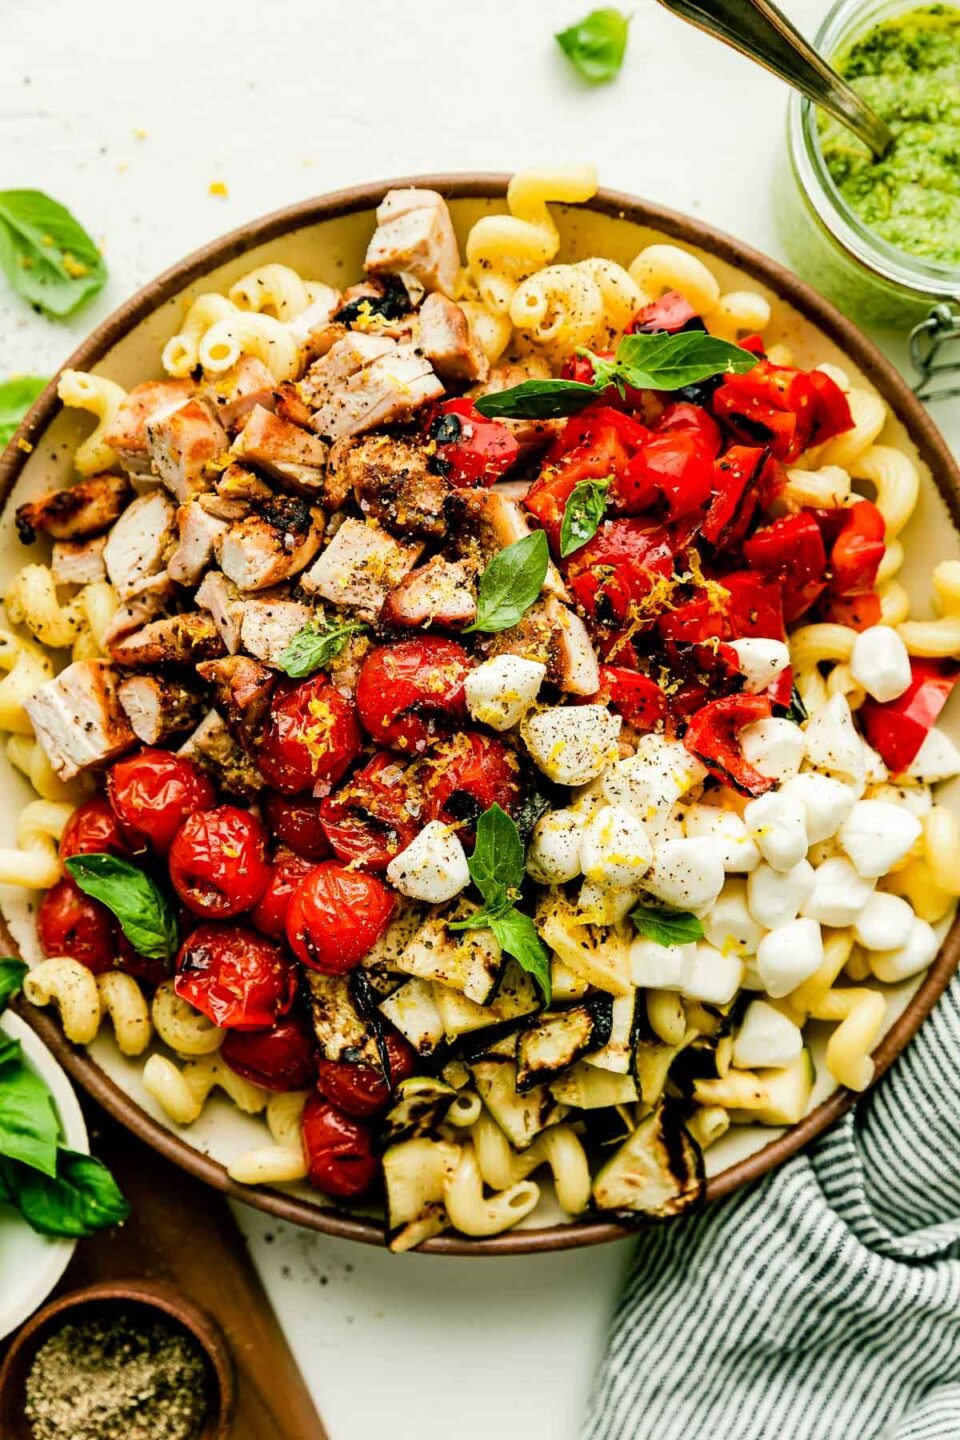 An overhead shot of a large bowl of prepared pasta salad ingredients, sitting alongside a wooden cutting board, bowl of basil leaves, striped dish towel, jar of pesto, and bowl of pepper atop a white surface.